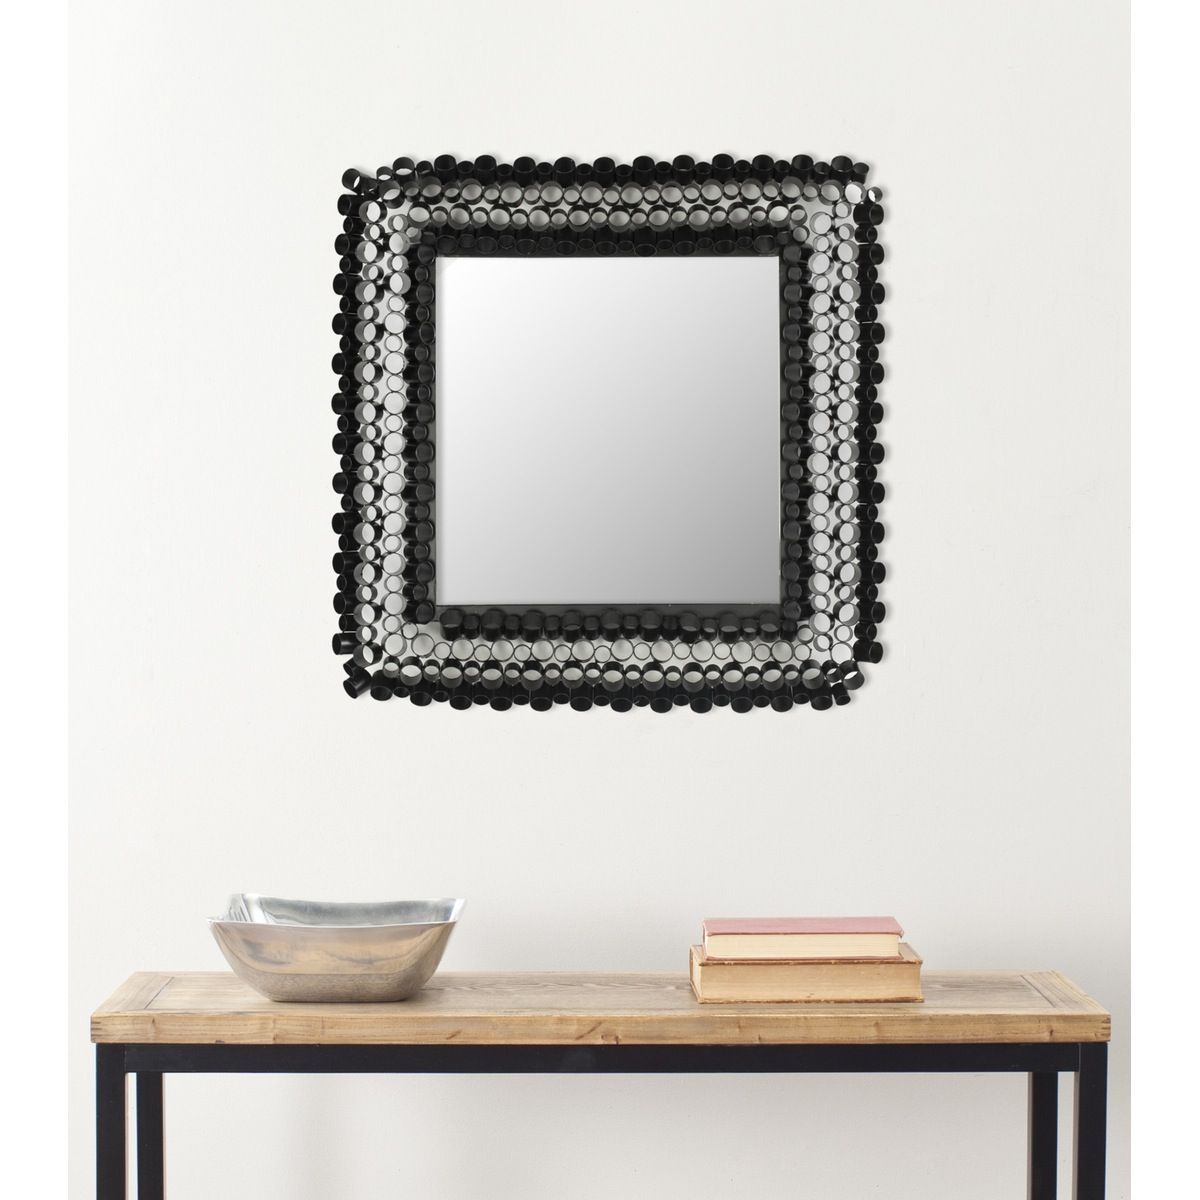 The Square Tube Mirror, With Its Dark Glossy Finish, Makes A With Regard To Square Modern Wall Mirrors (Photo 6 of 15)